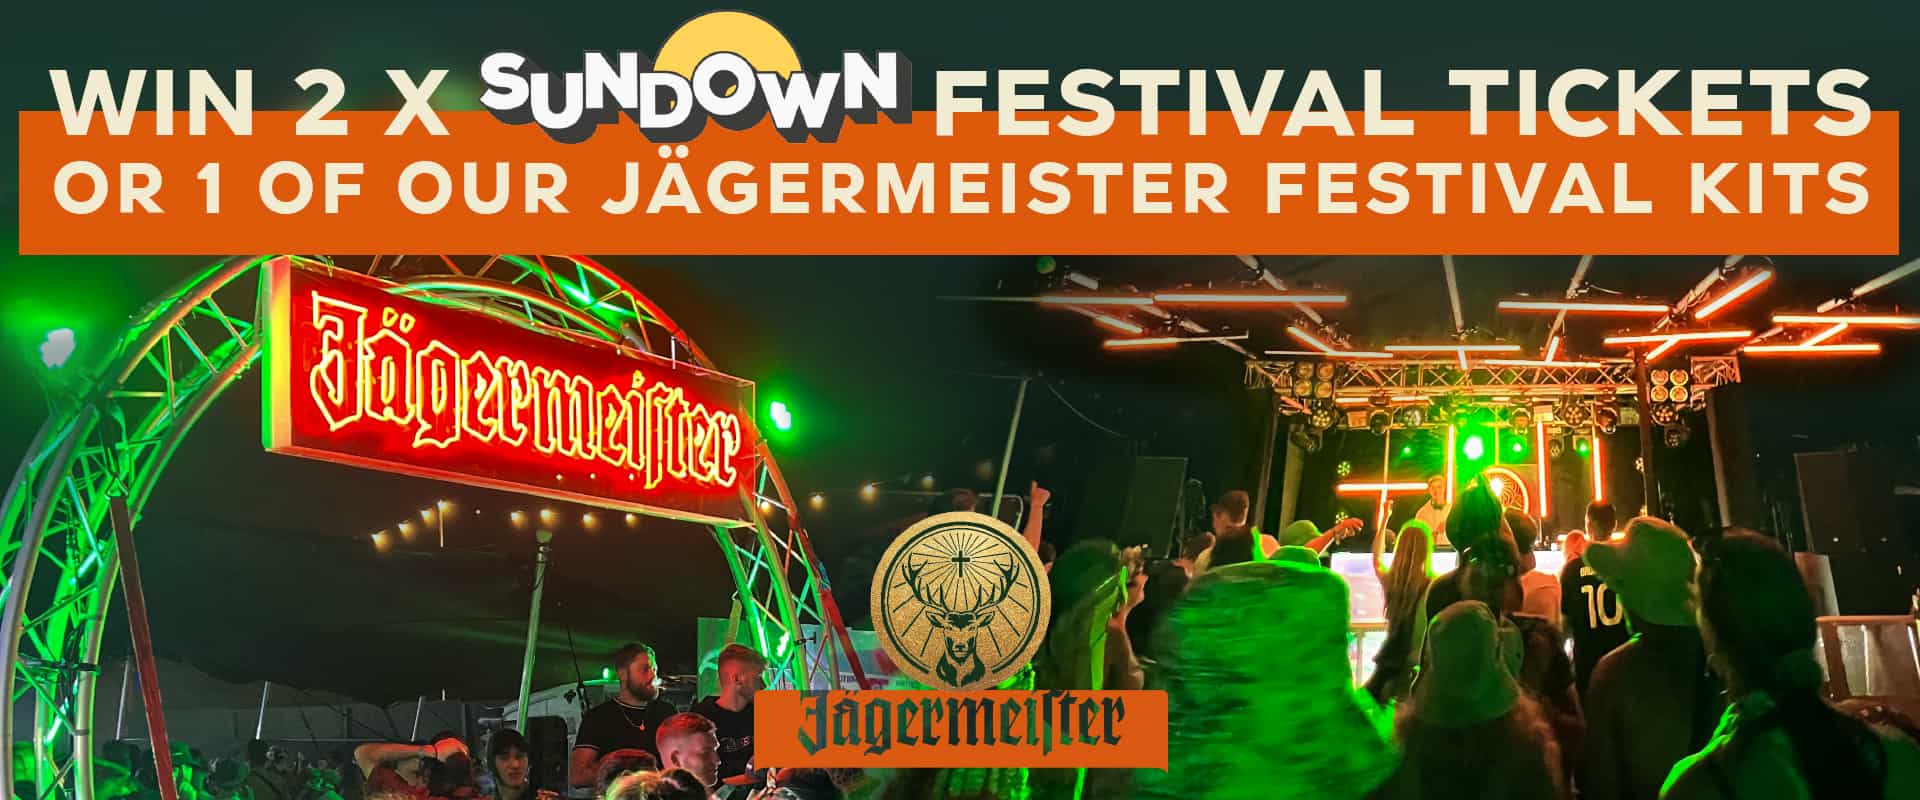 Win 2 tickets to Sundown Festival with Jagermeister and Fever Barnstaple